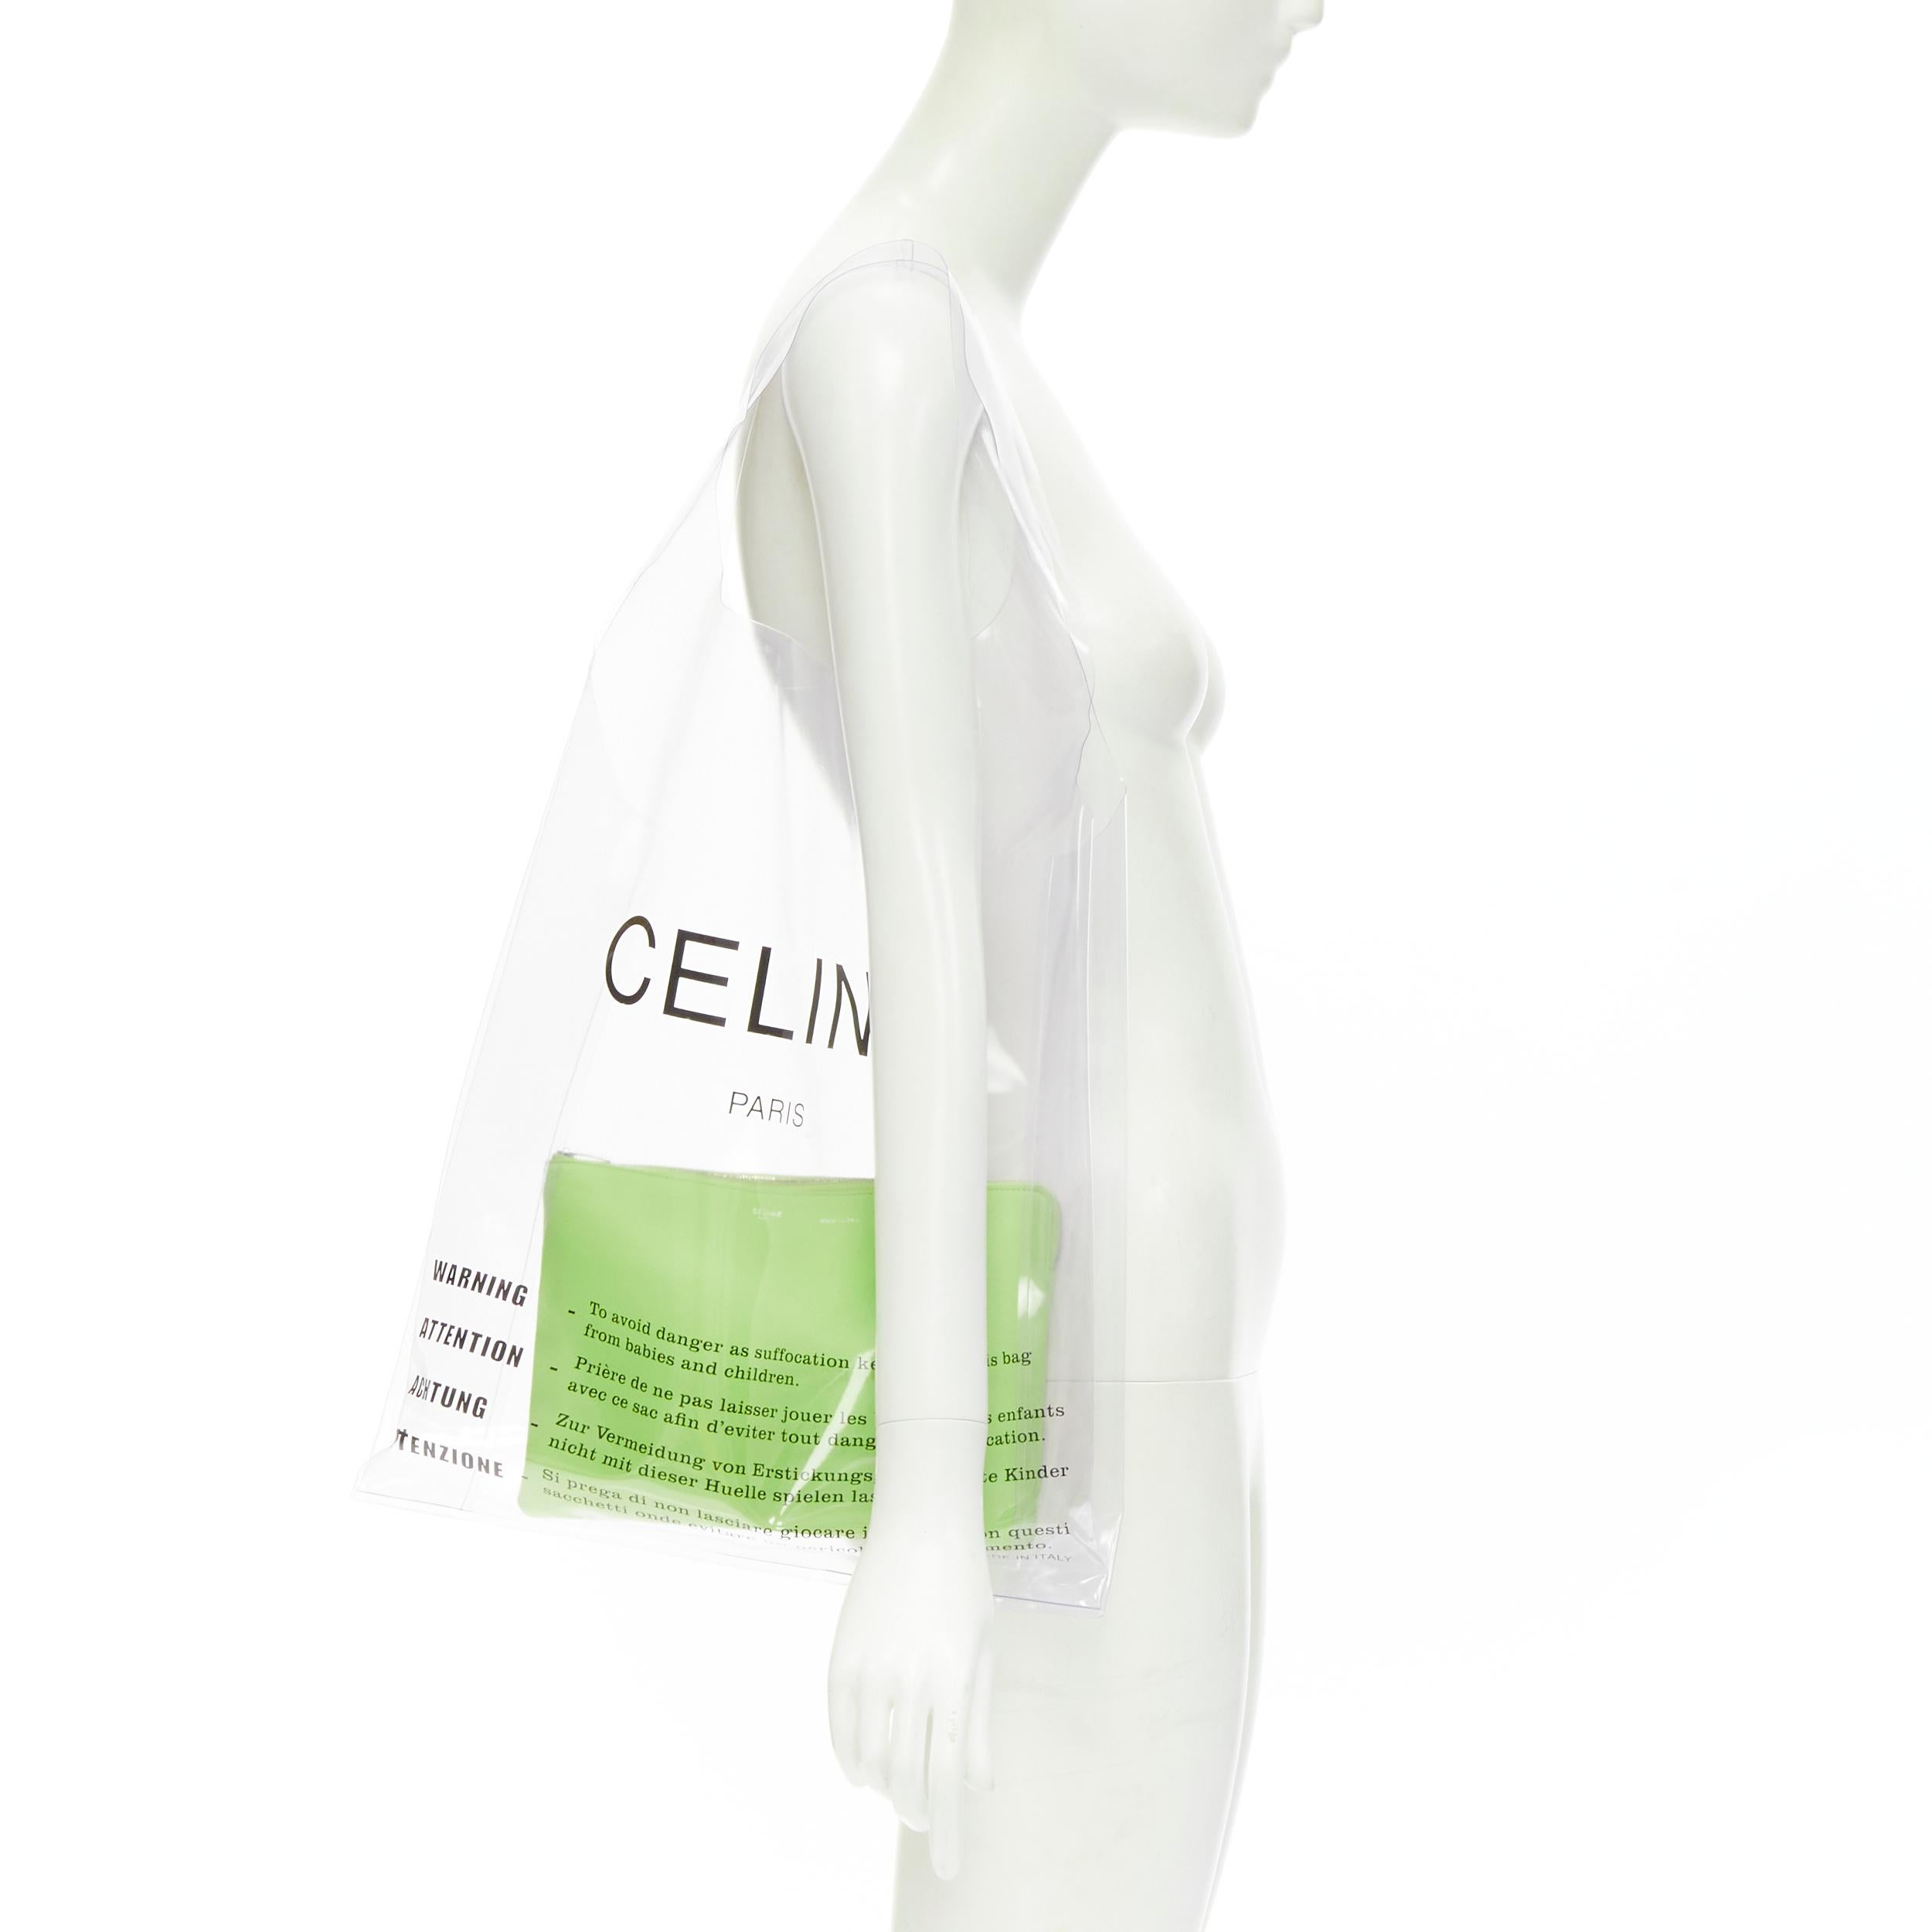 OLD CELINE Phoebe Philo 2018 Lime green zip pouch clear PVC shopper tote bag 
Reference: KEDG/A00001 
Brand: Celine 
Designer: Phoebe Philo 
Model: PVC tote with pouch 
Material: PVC 
Color: Green 
Pattern: Logo 
Closure: Zip 
Extra Detail: Logo